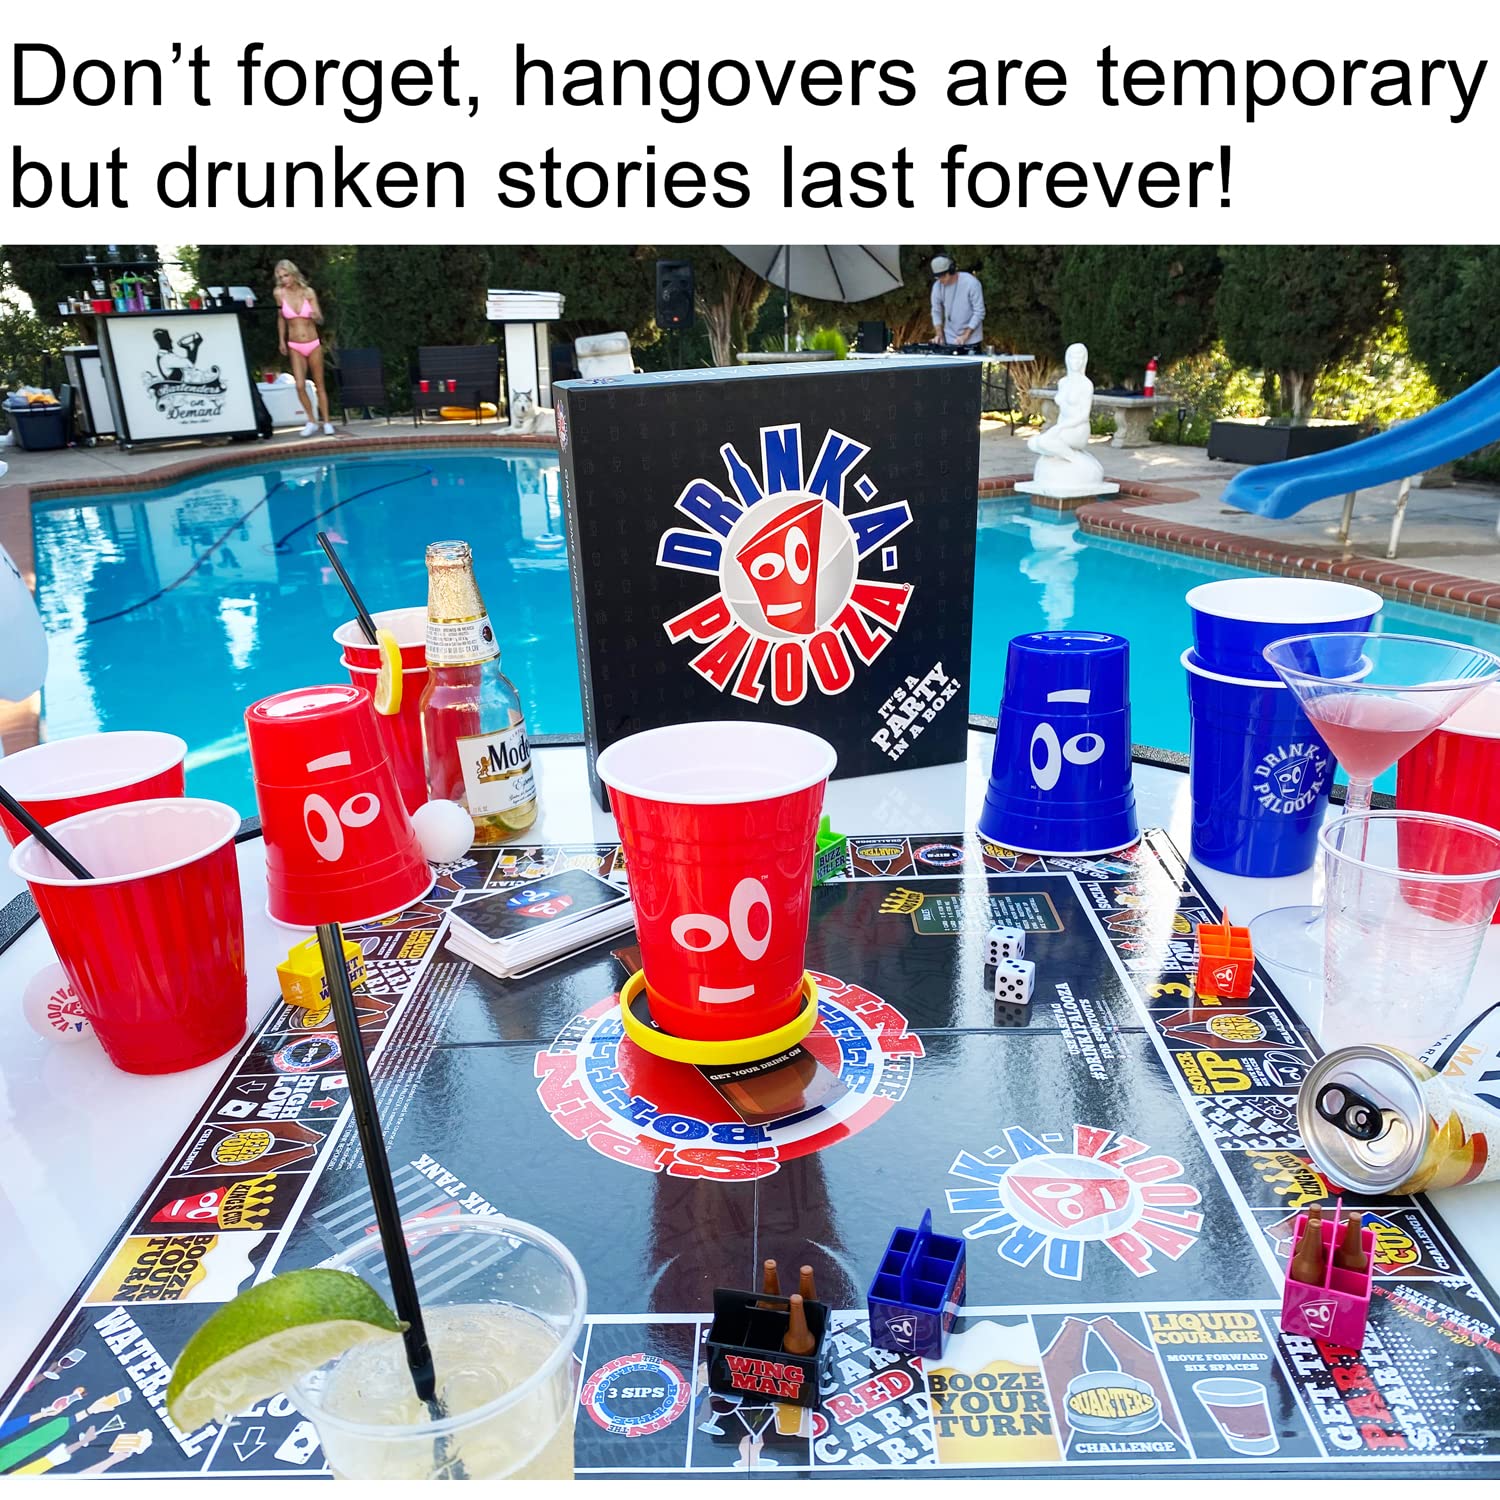 DRINK-A-PALOOZA Board Game: Fun Drinking Games for Couples Game Night | The Drinking Board Game for Parties That Combines Beer Pong + Flip Cup + Kings Cup Card Game and All The Best Drinking Games